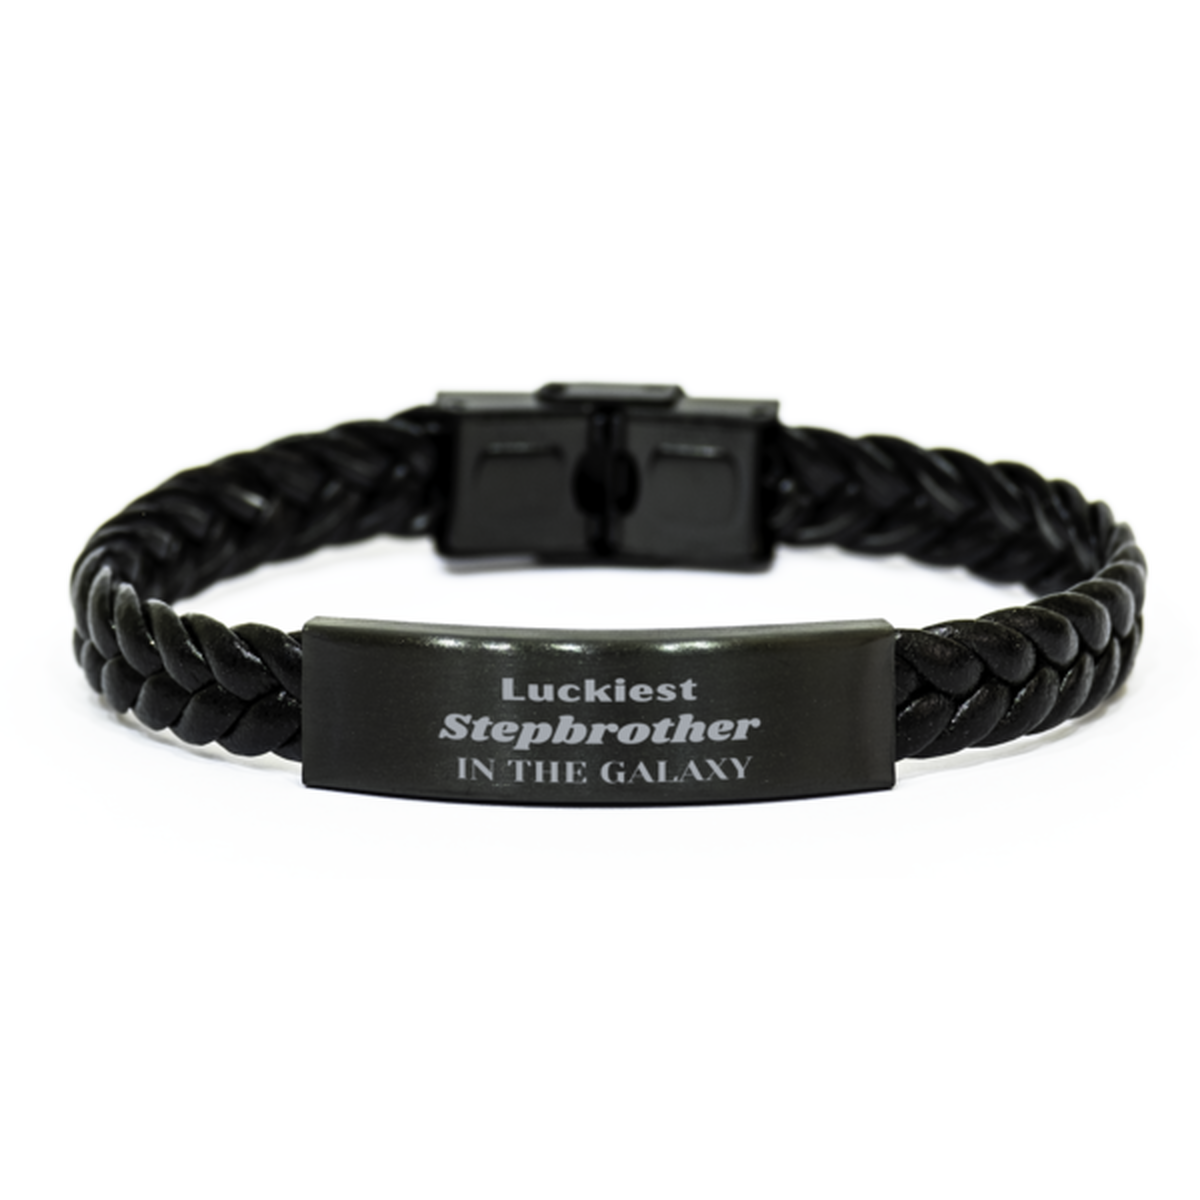 Luckiest Stepbrother in the Galaxy, To My Stepbrother Engraved Gifts, Christmas Stepbrother Braided Leather Bracelet Gifts, X-mas Birthday Unique Gifts For Stepbrother Men Women